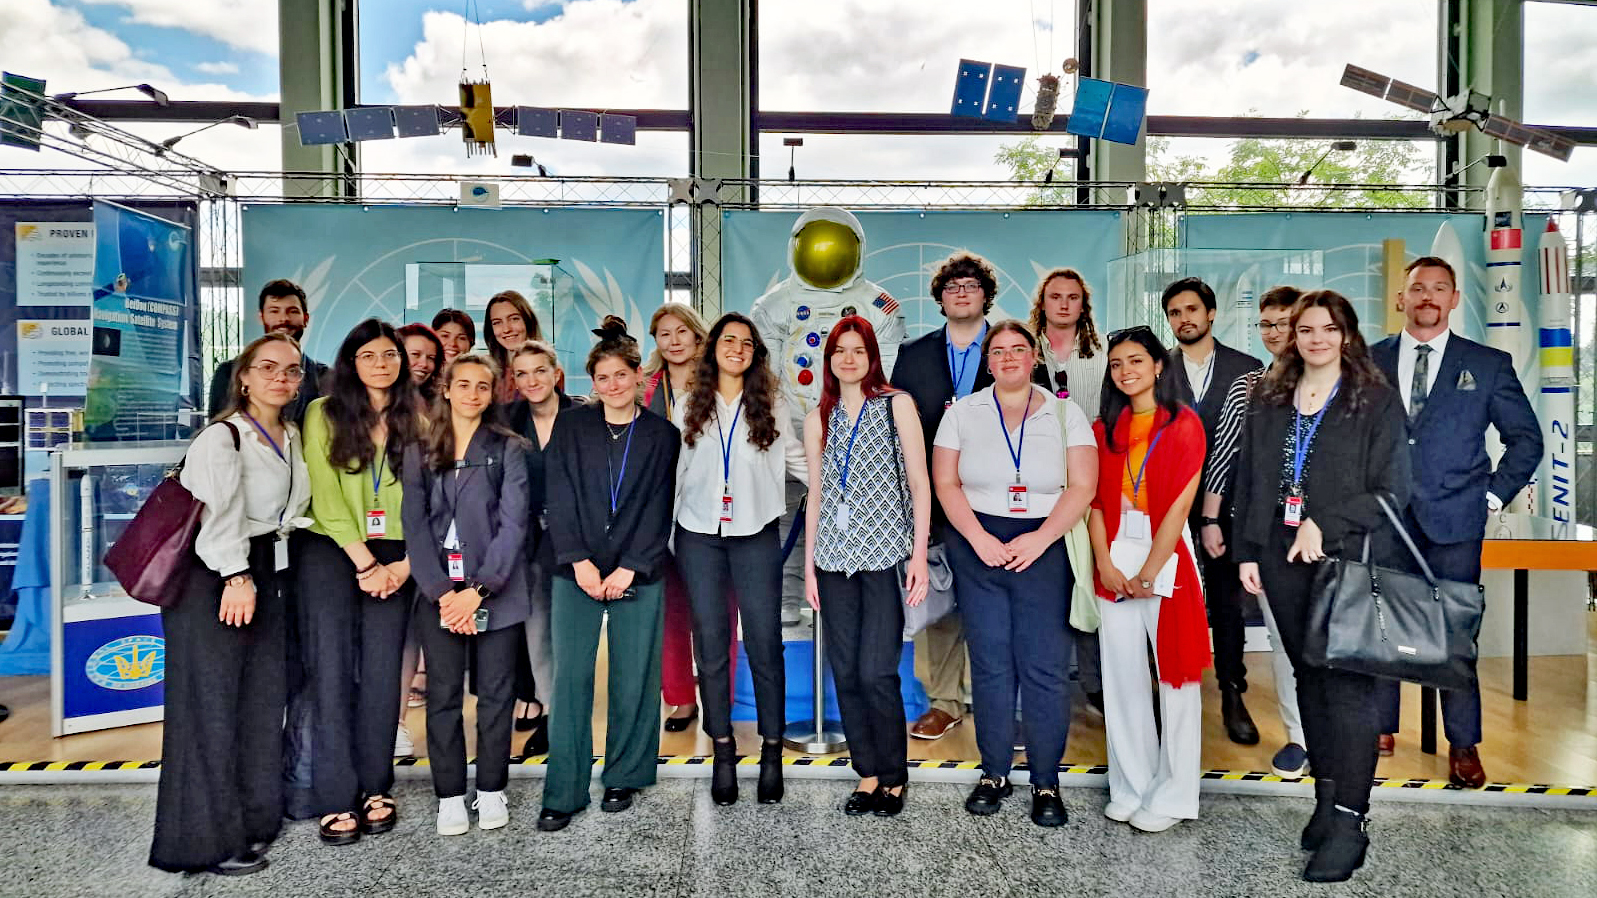 A group photo taken inside a building with students participating in the Summer School on Transnational Organised Crime.